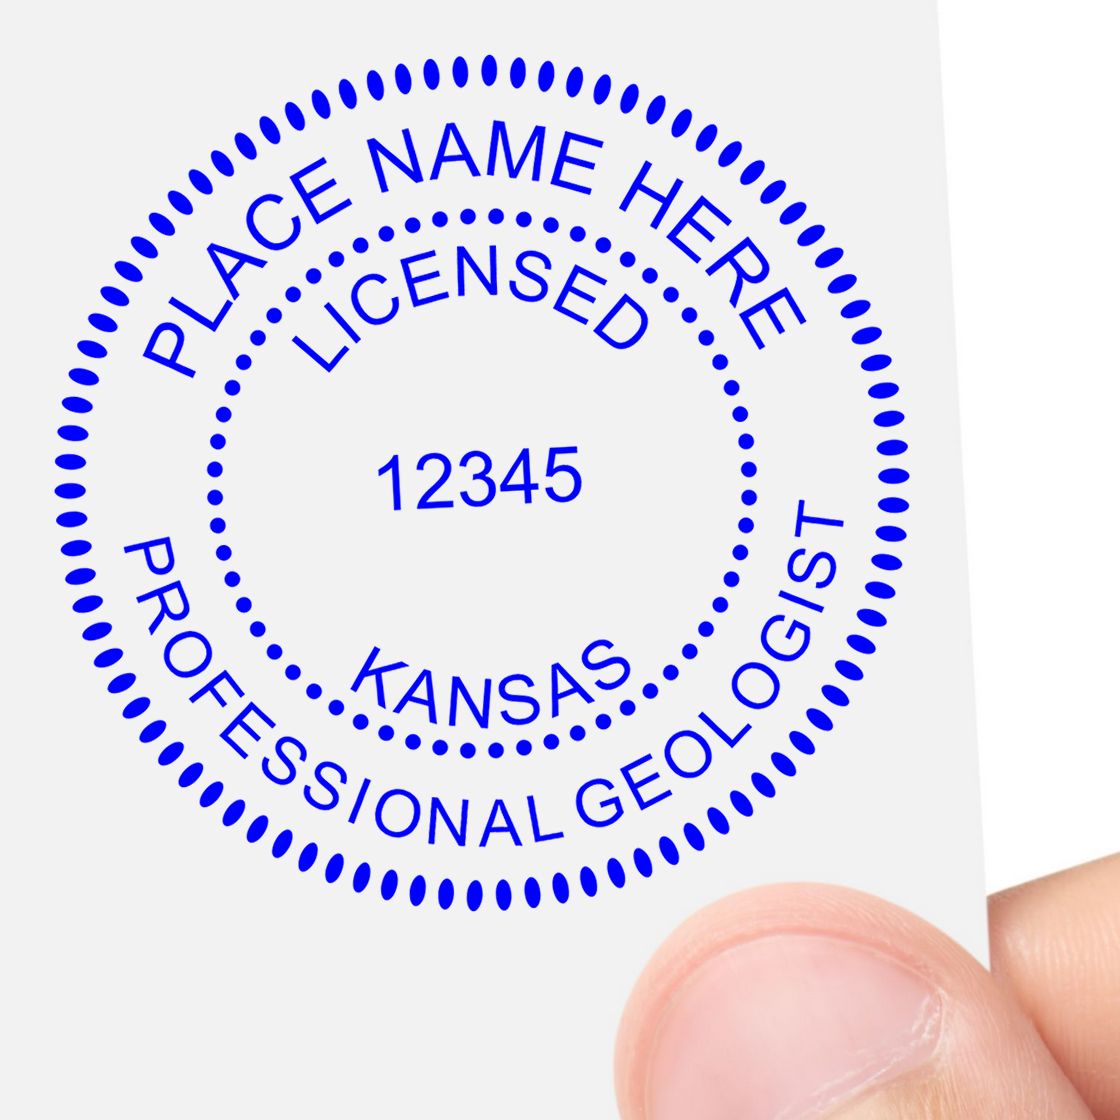 This paper is stamped with a sample imprint of the Self-Inking Kansas Geologist Stamp, signifying its quality and reliability.